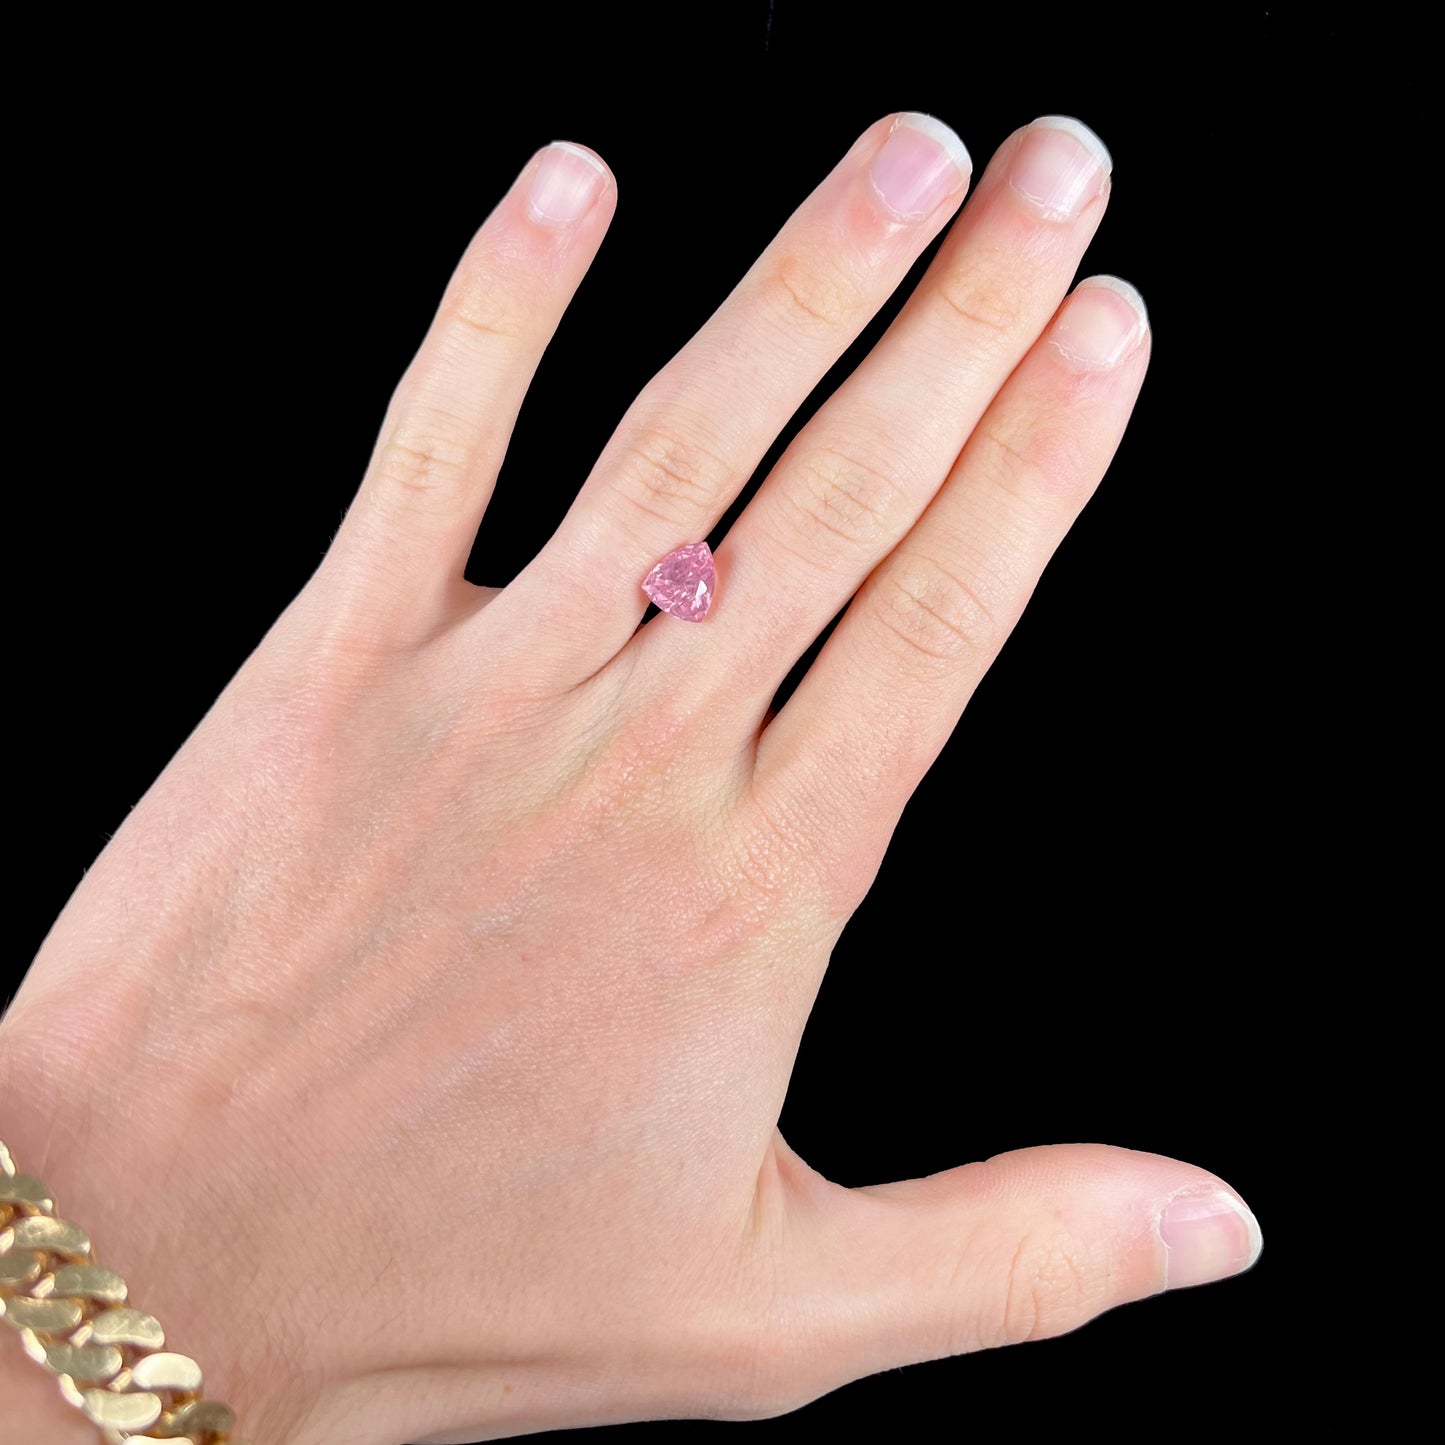 A loose, faceted trillion cut pink touramline gemstone.  The stone is a light bubblegum pink color.